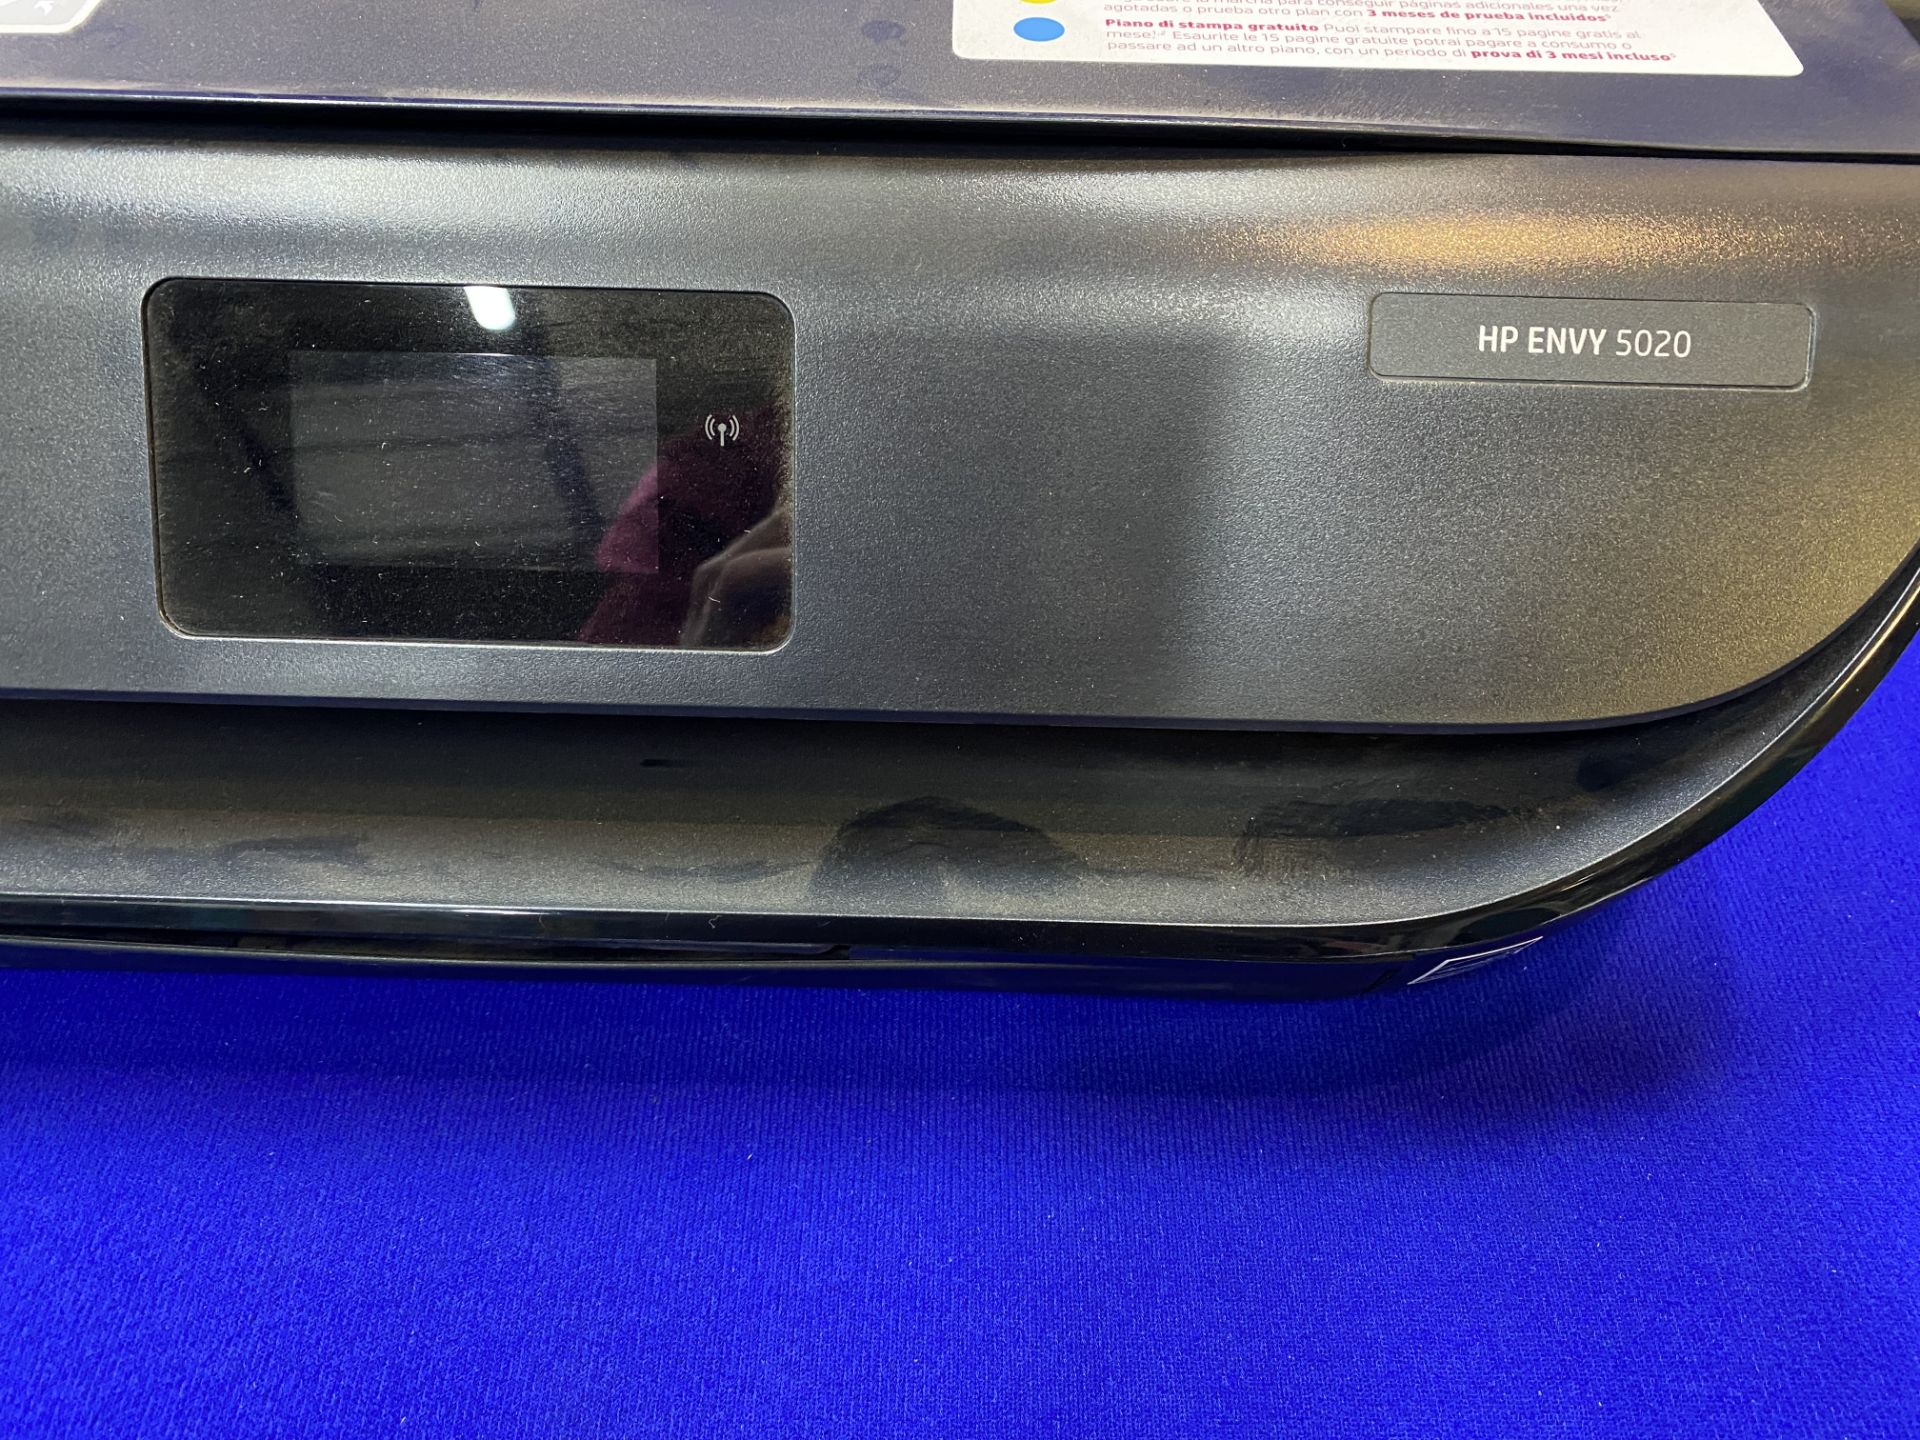 HP Envy 5020 Wireless All-In-One Printer - Image 9 of 20